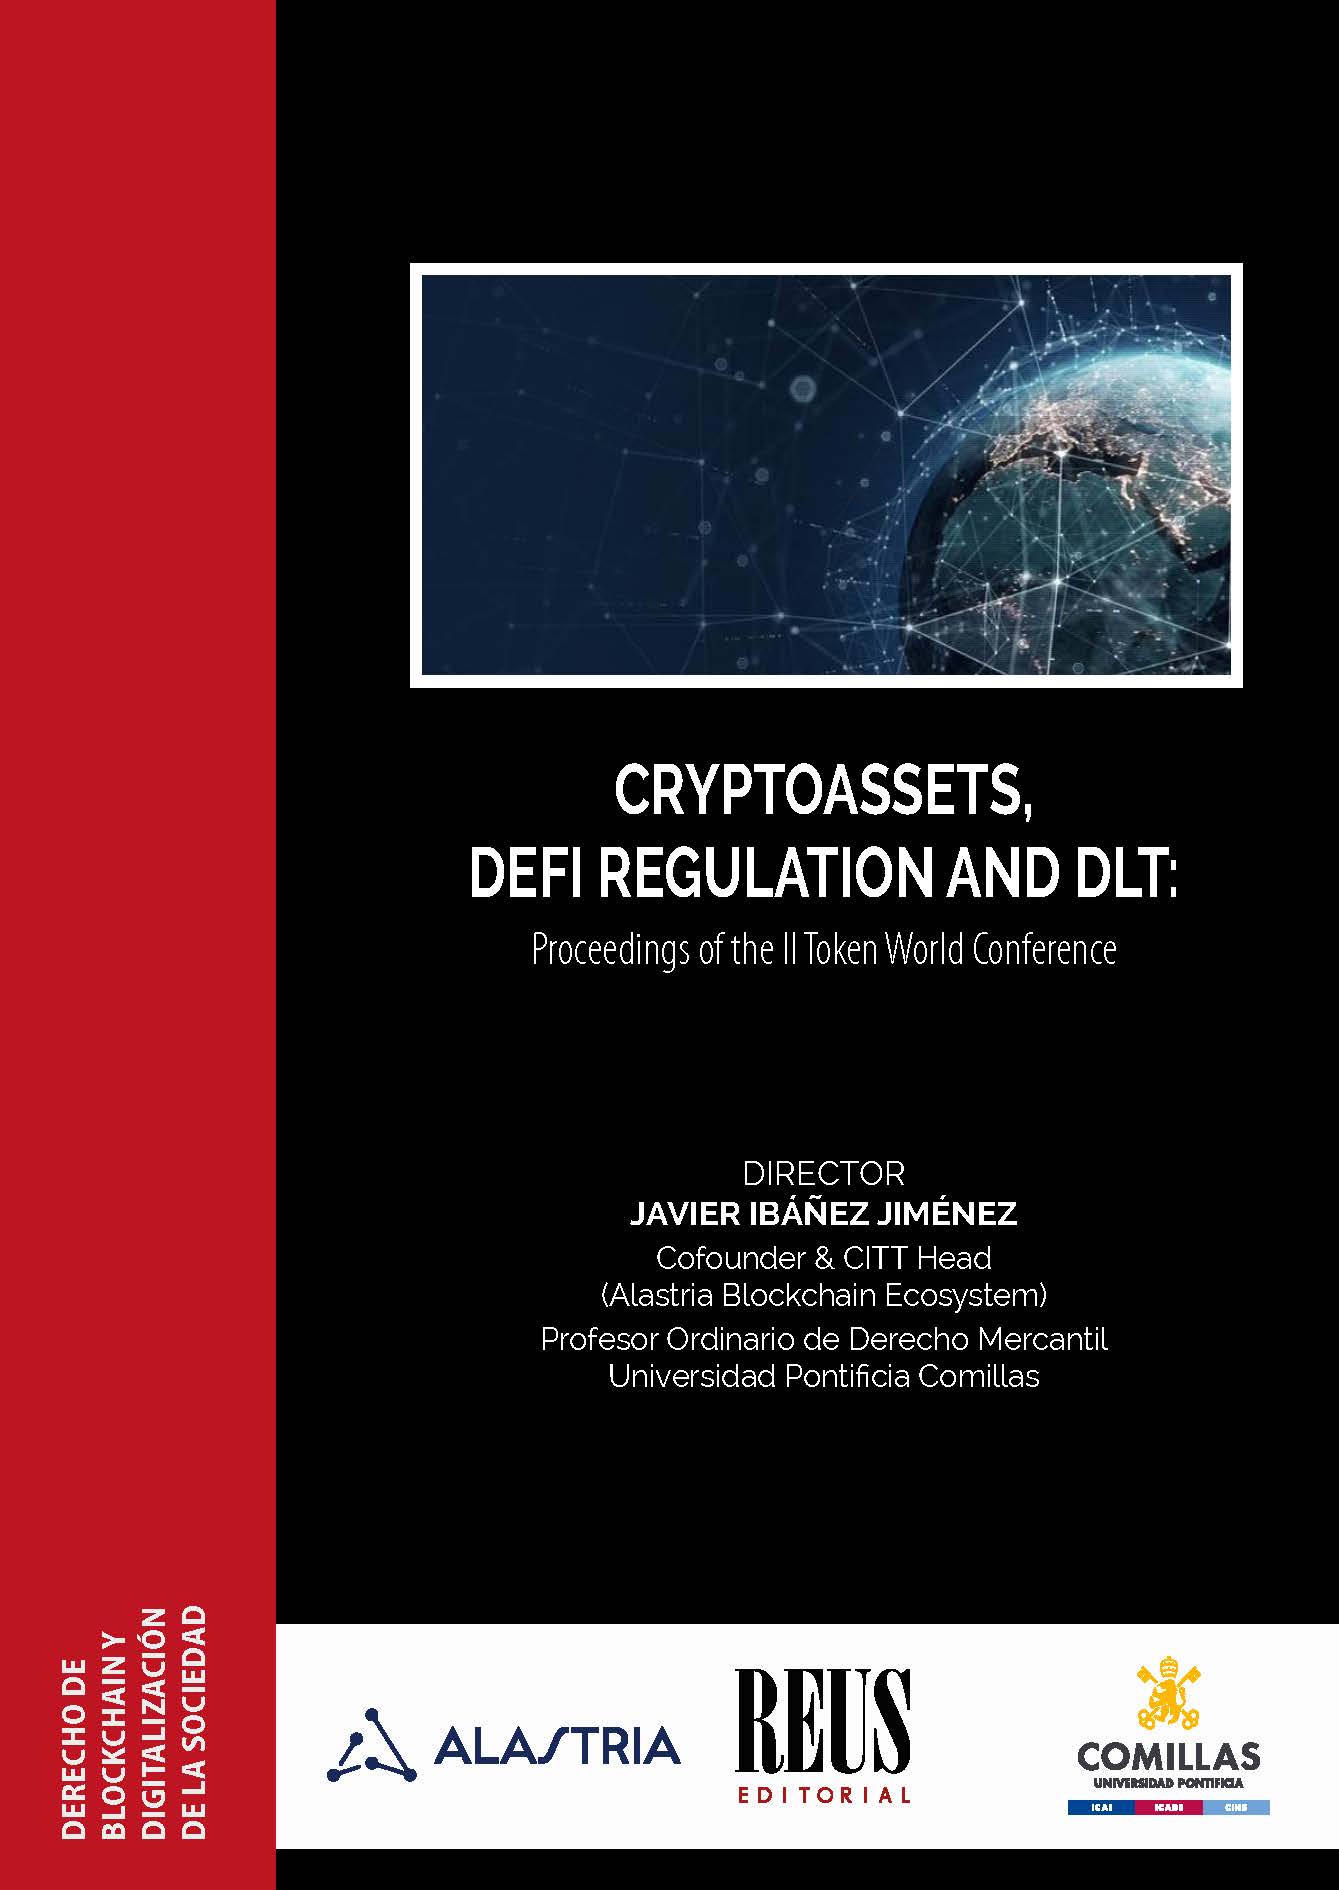 Cryptoassets, DeFi Regulation and DLT: Proceedings of the II Token World Conference. 9788429027044